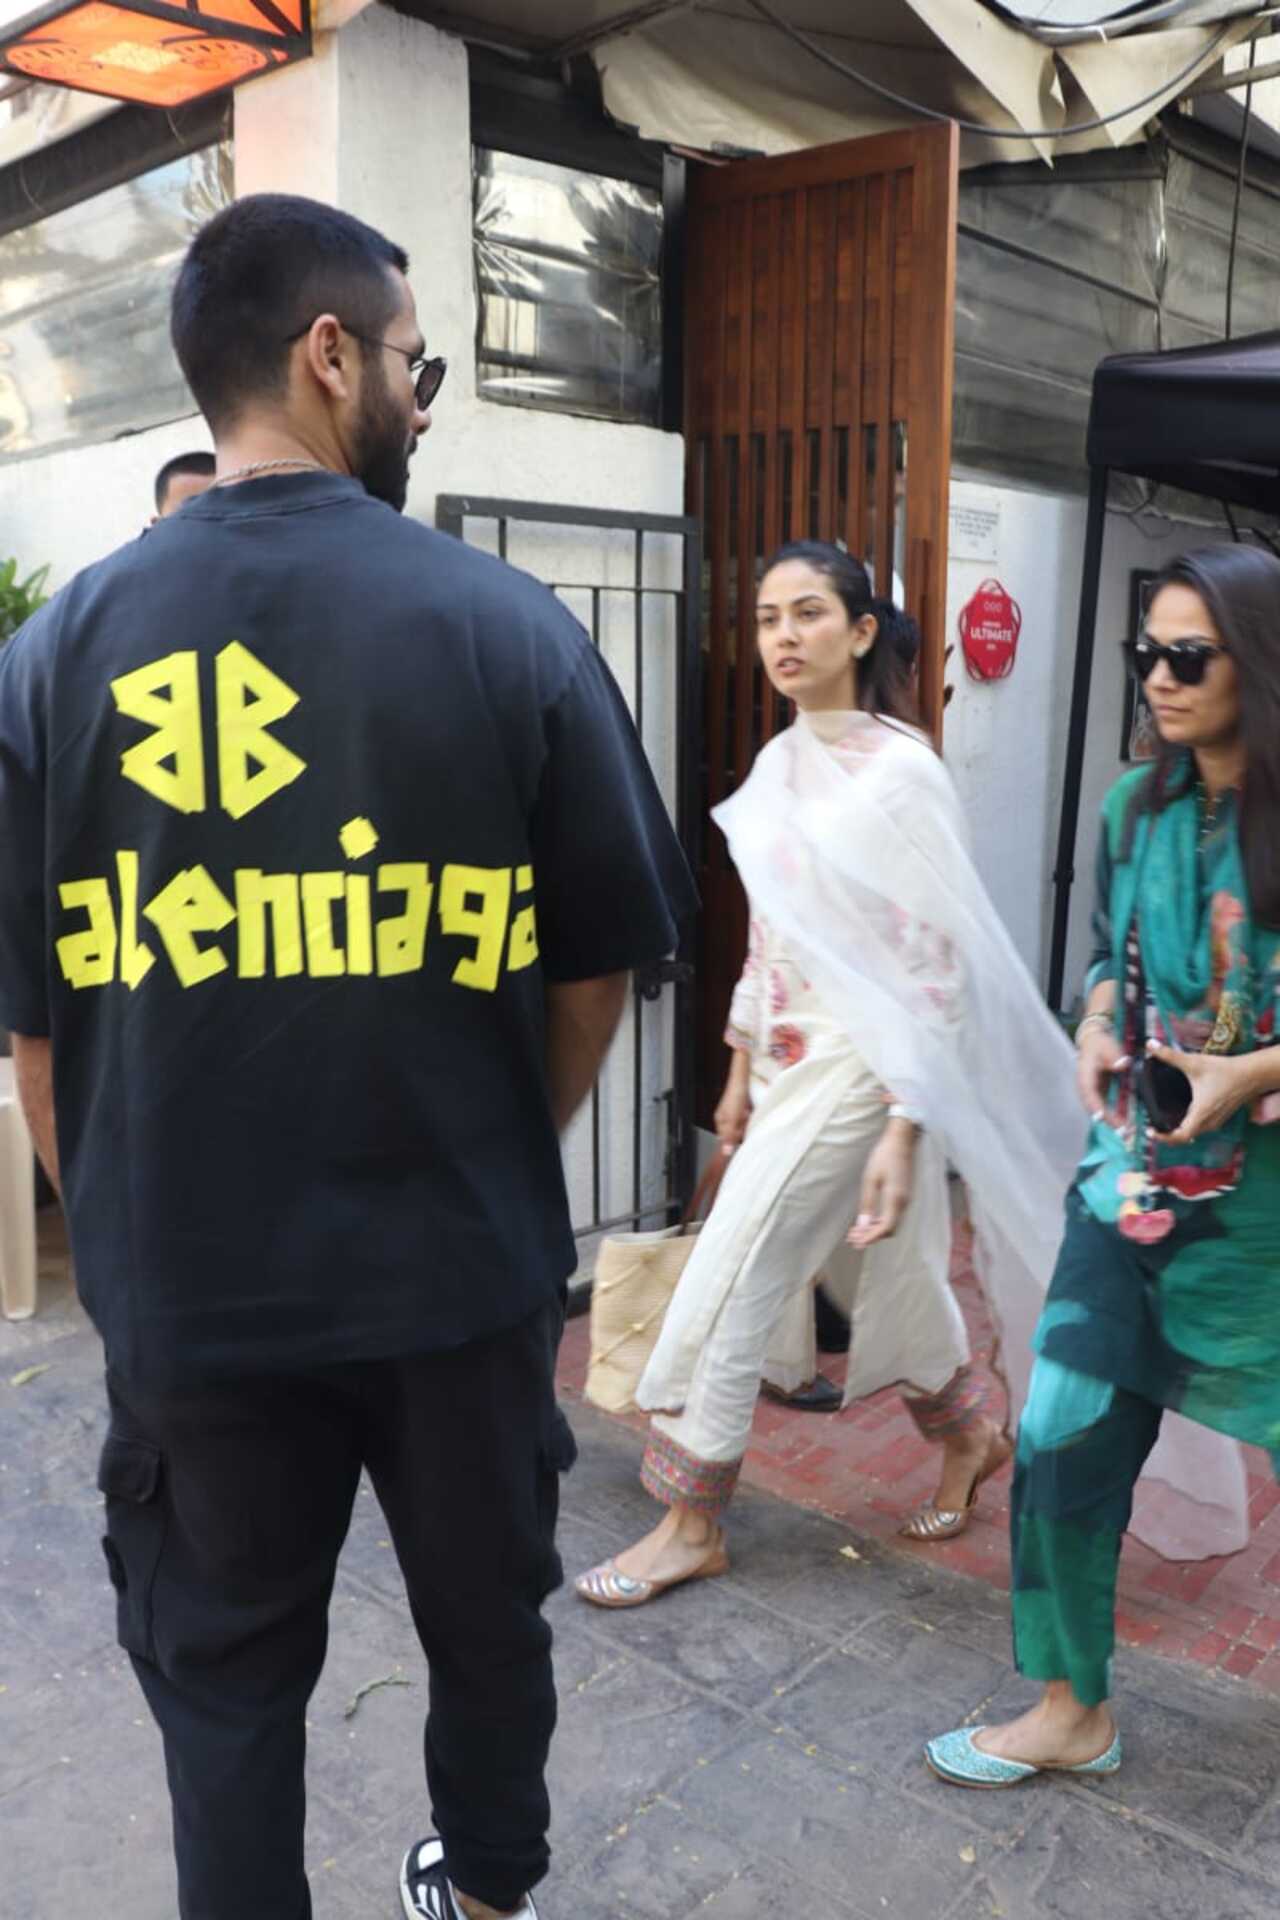 Shahid and his wife Mira Kapoor were spotted at a restaurant in the city